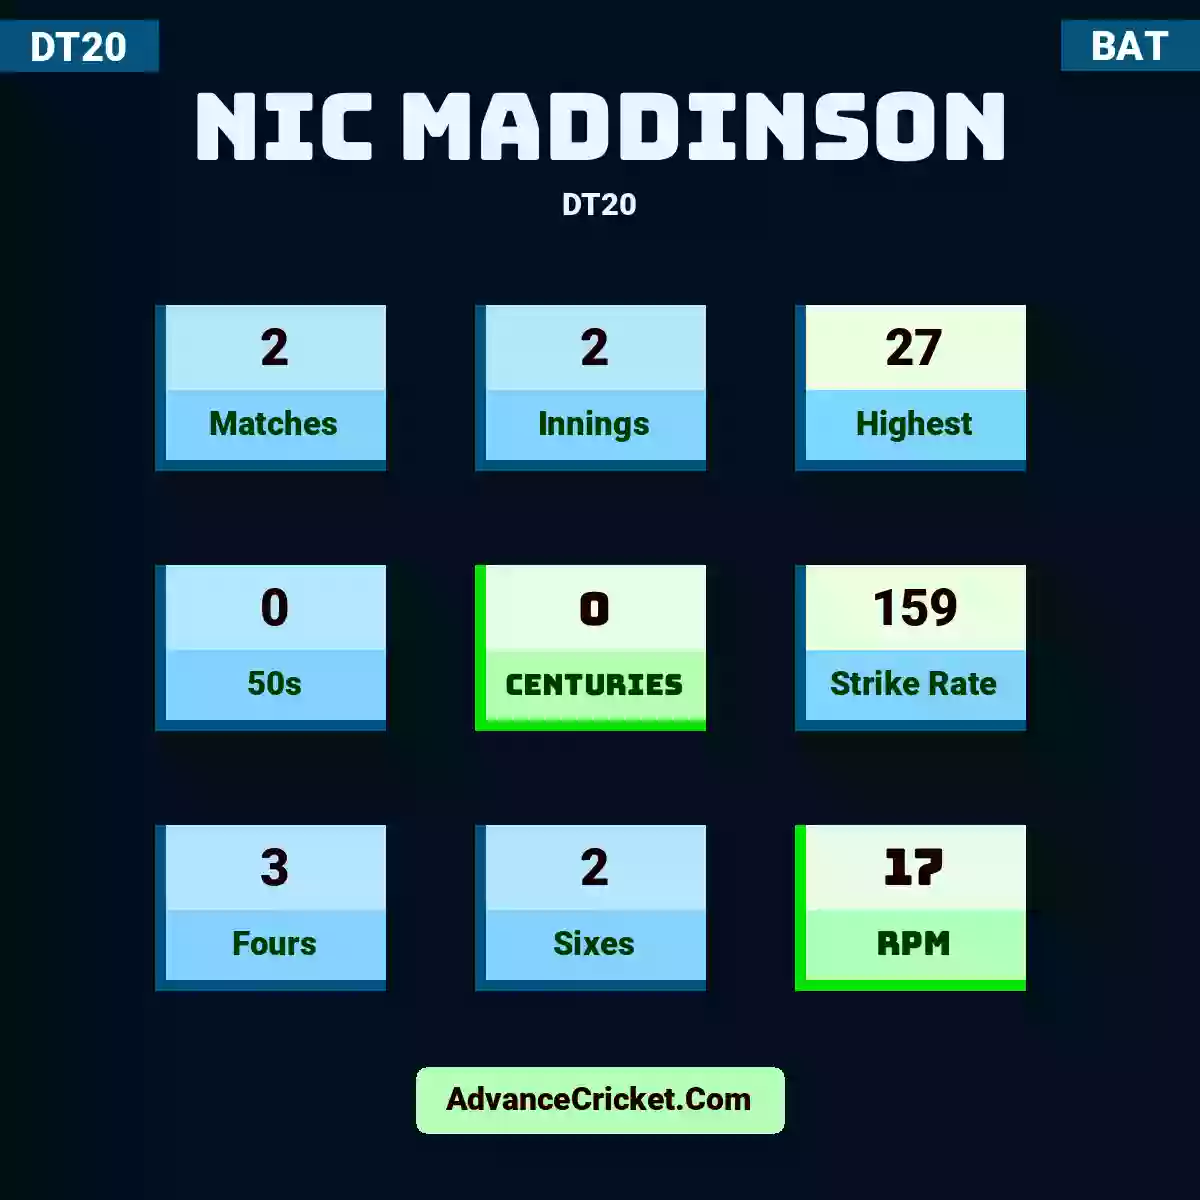 Nic Maddinson DT20 , Nic Maddinson played 2 matches, scored 27 runs as highest, 0 half-centuries, and 0 centuries, with a strike rate of 159. N.Maddinson hit 3 fours and 2 sixes, with an RPM of 17.